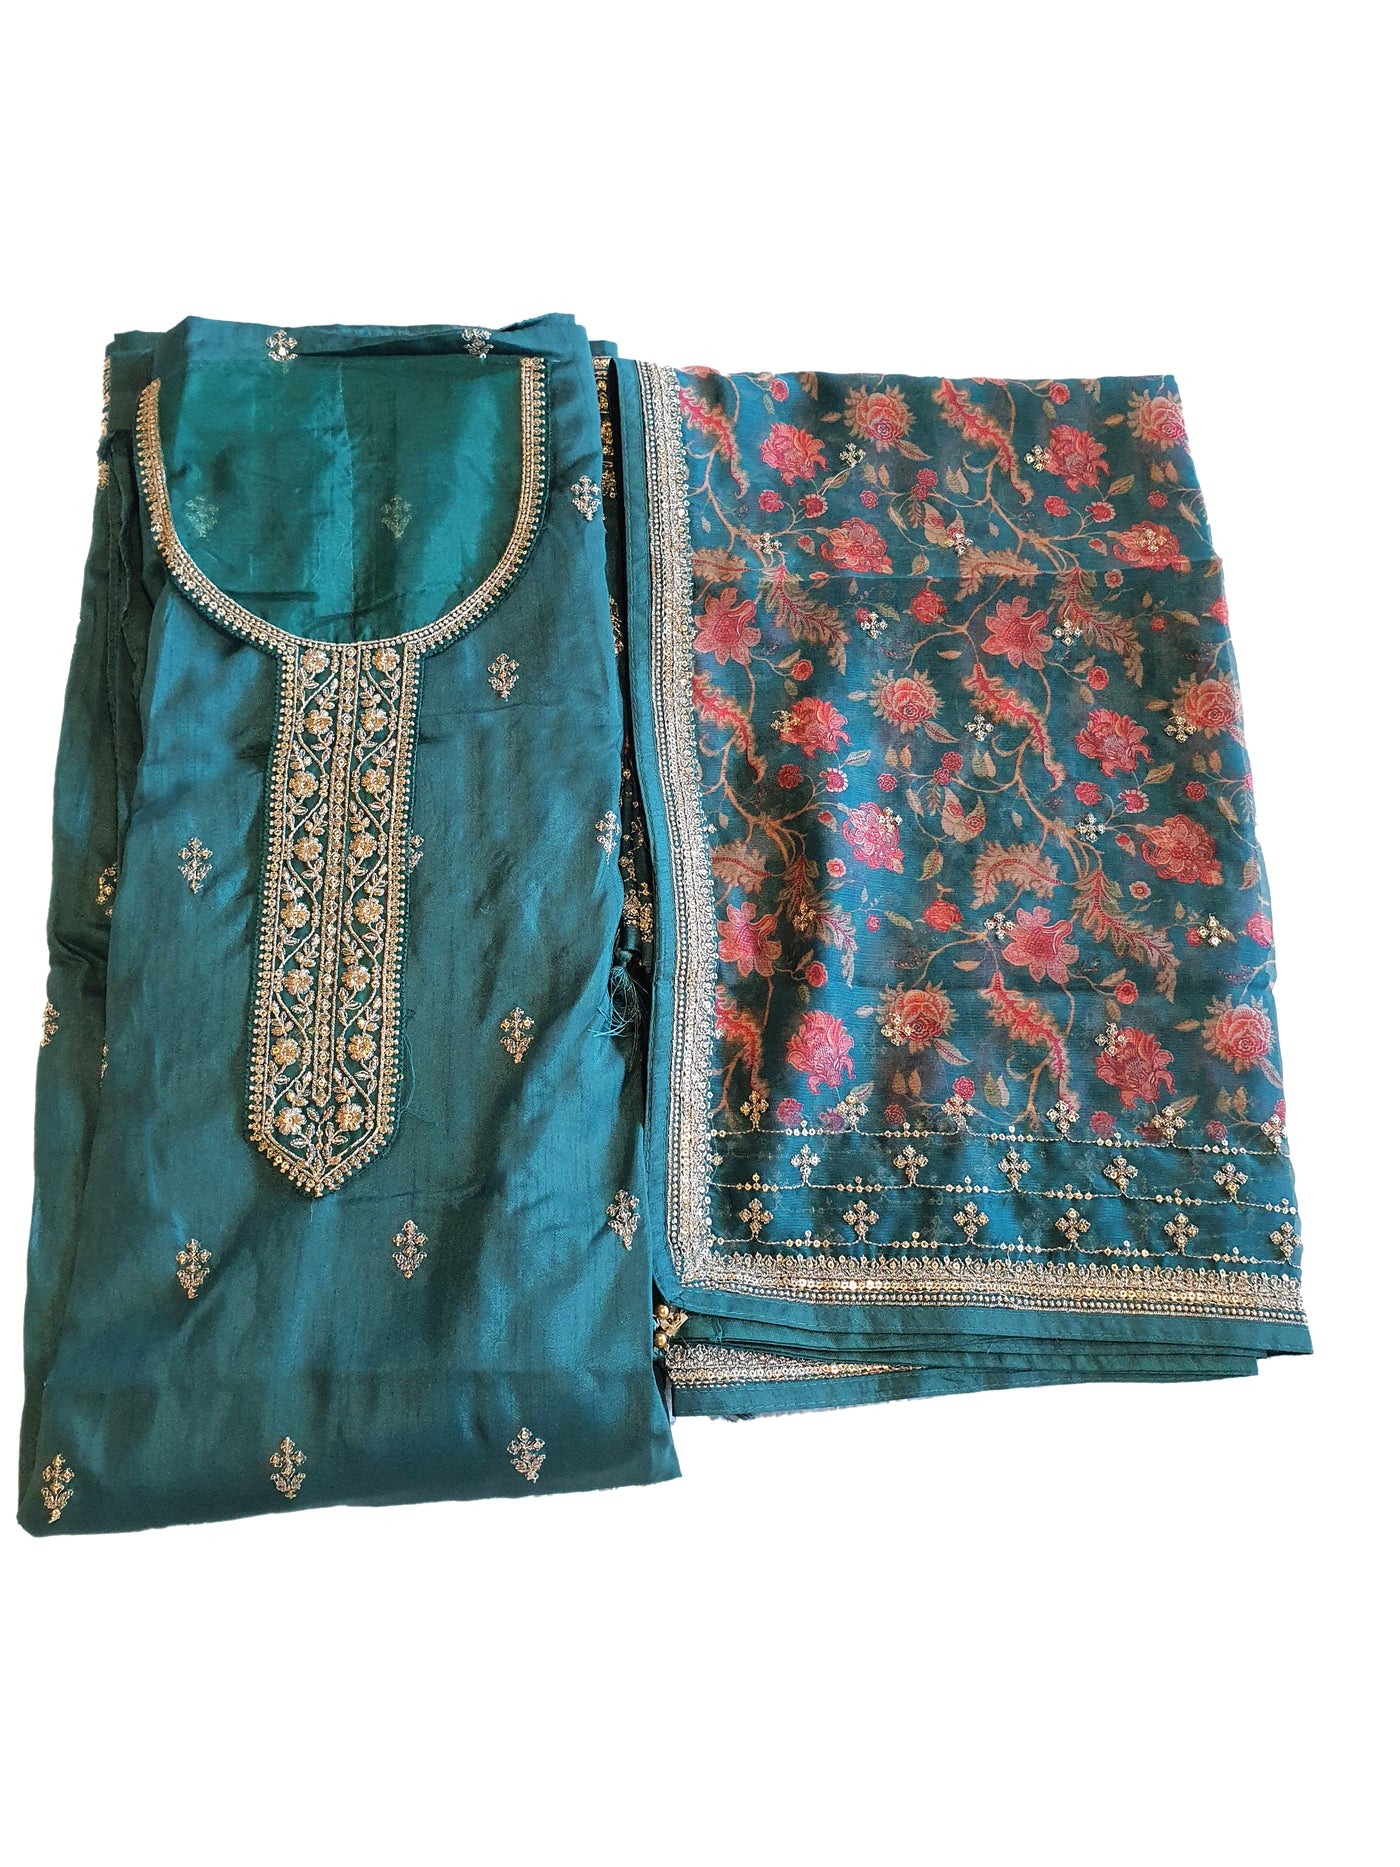 Sea Green Modal Silk Embroidered Suit Set